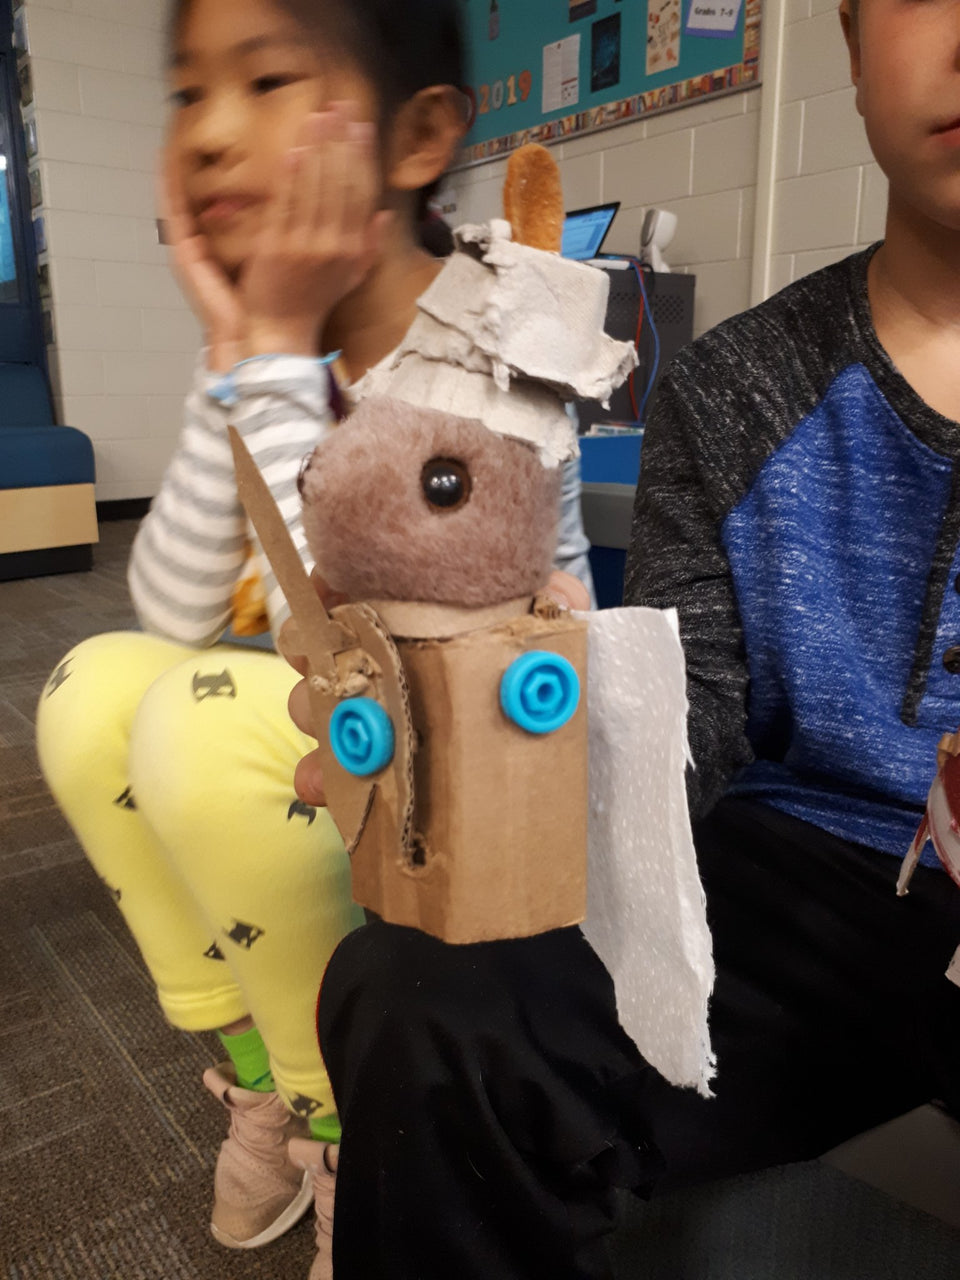 Making soft toy enhancements with cardboard and Makedo.